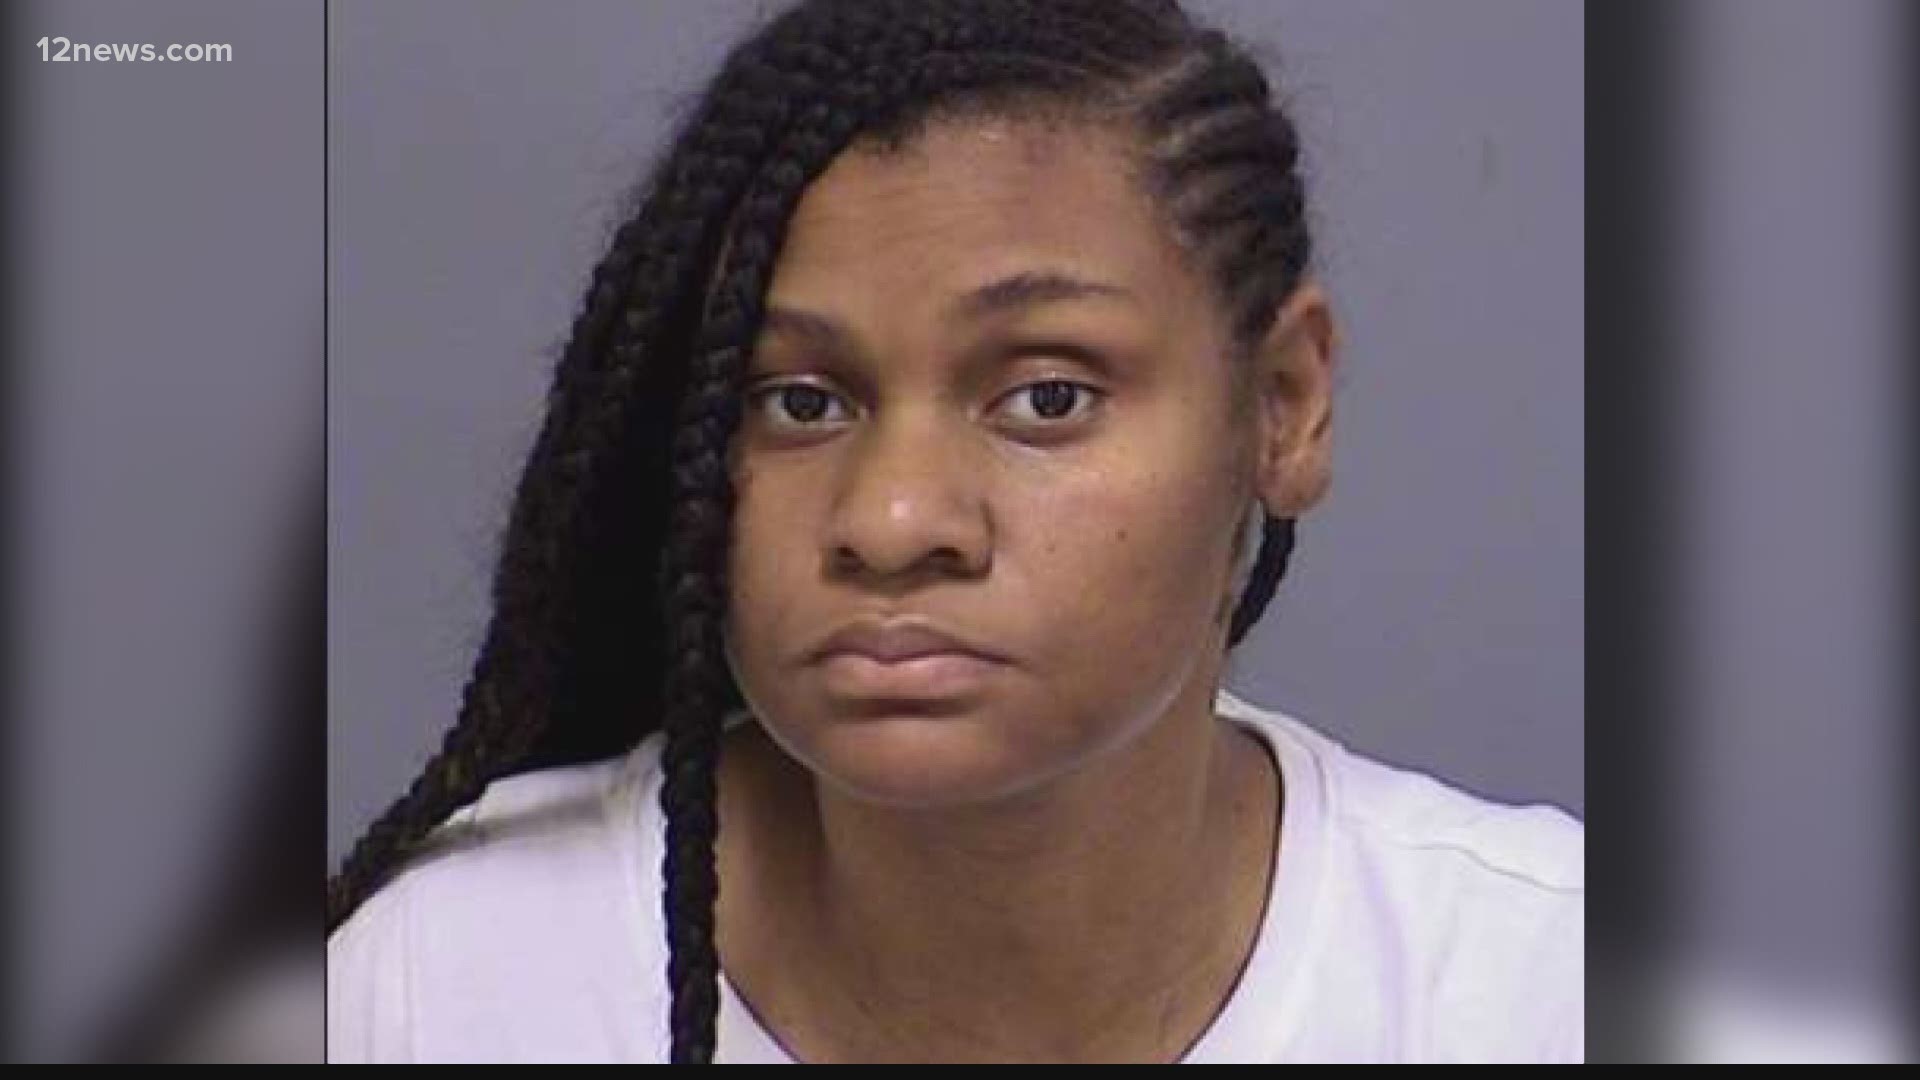 The Arizona Department of Public Safety has arrested Iyona Holton in connection with the Tonopah crash that killed six and injured five others, including Holton.